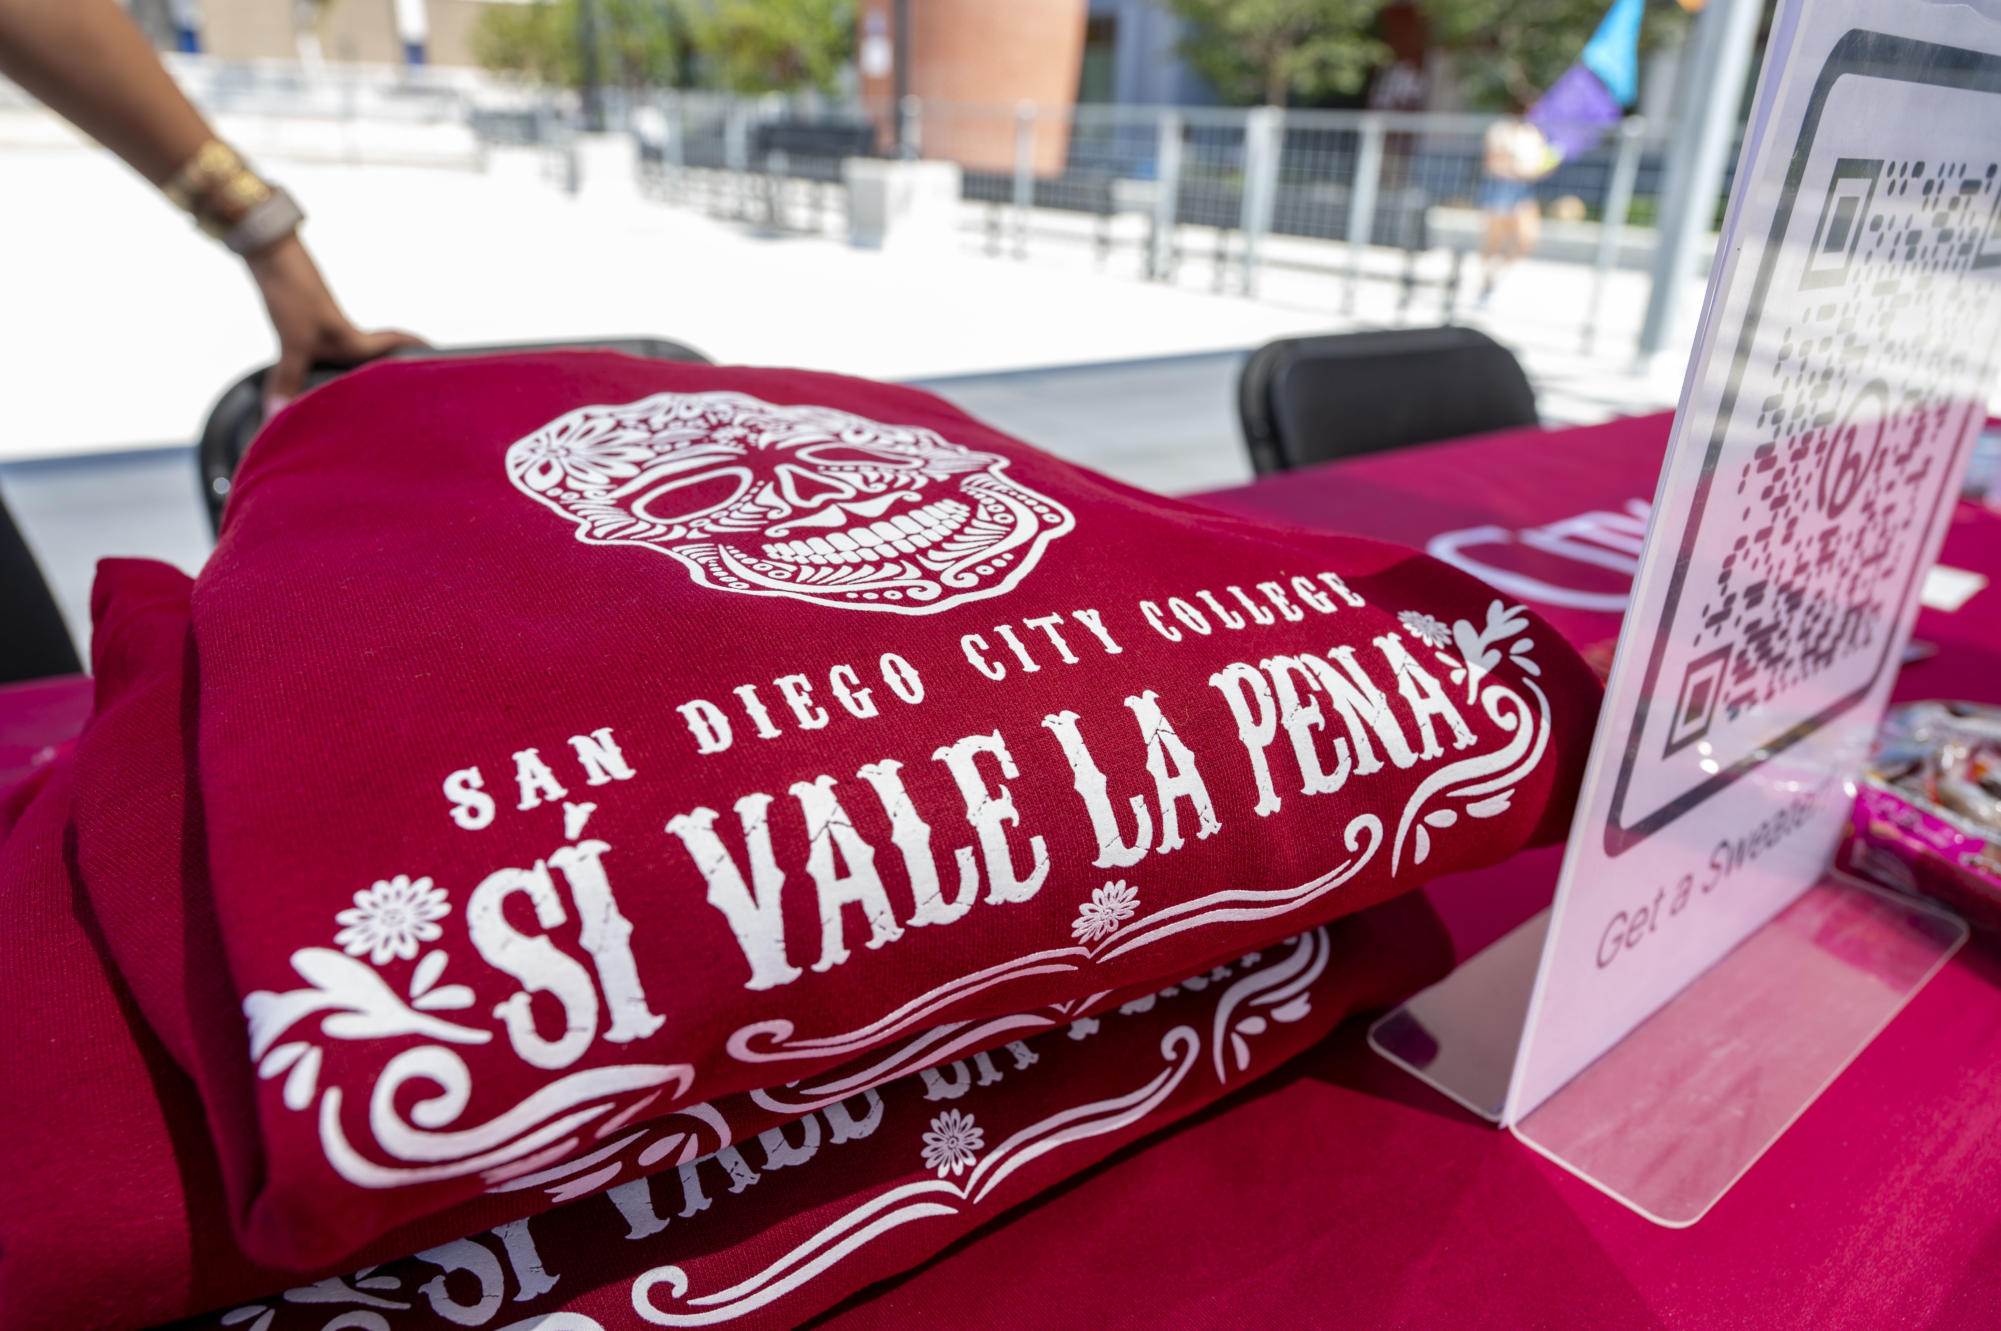 “SI, VALE LA PENA” sweater featured at the Chicanx/Latinx Bienvenida Estudiantil, August 29, 2023. Photo courtesy of San Diego City College flickr